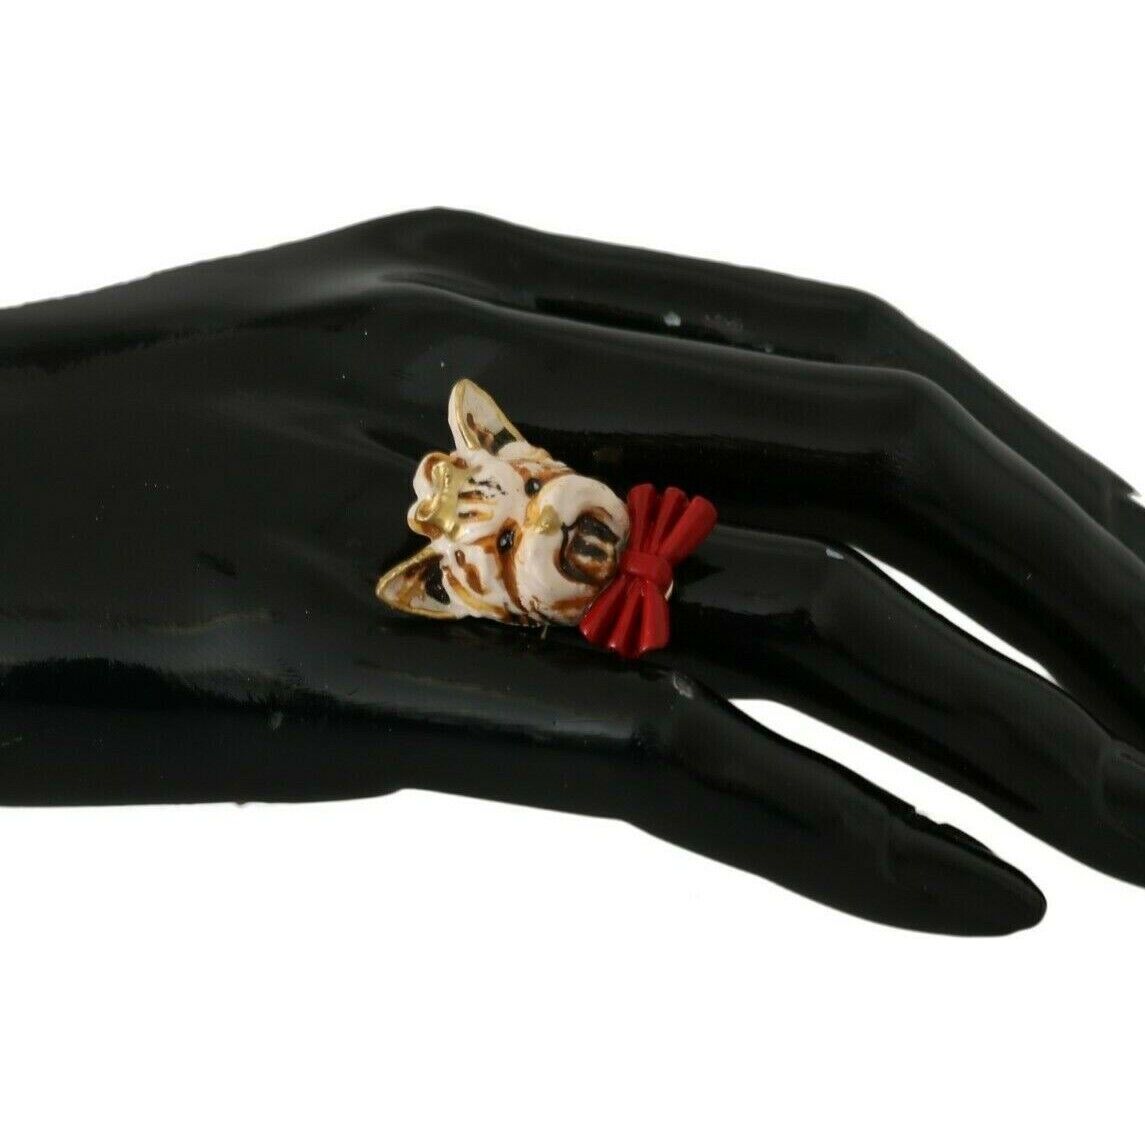 Dolce & Gabbana Elegant Canine-Inspired Gold Tone Ring Ring beige-dog-pet-branded-accessory-gold-brass-resin-ring s-l1600-2022-10-06T123604.835-e94f9c01-bfb.jpg